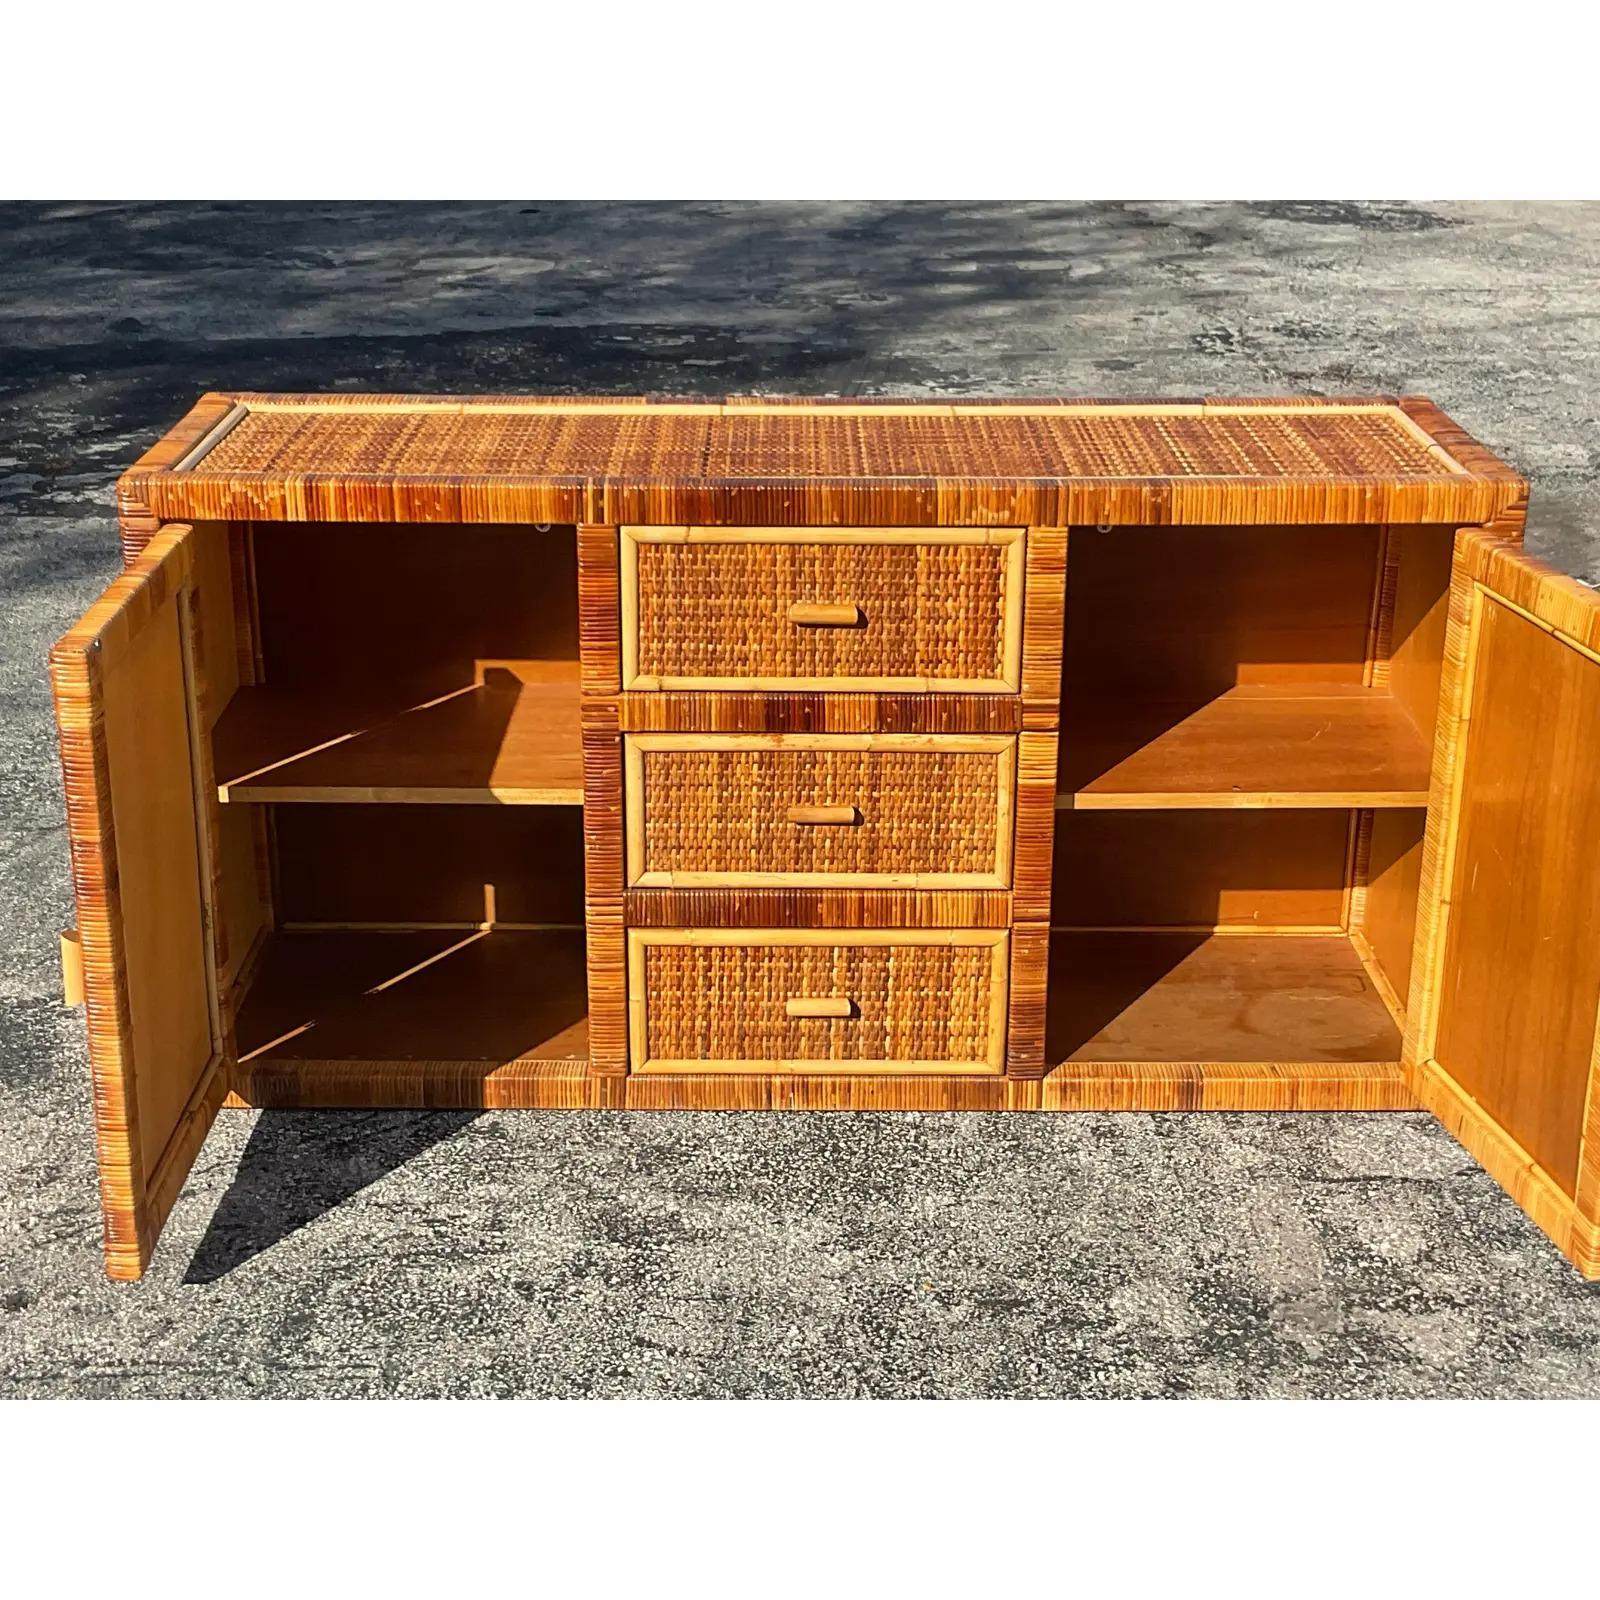 A fabulous vintage Coastal credenza. A chic wrapped rattan in rich warm colors. Lots of great storage below with two cabinets and three doors. Inset woven rattan panels. Acquired from a Palm Beach estate. 